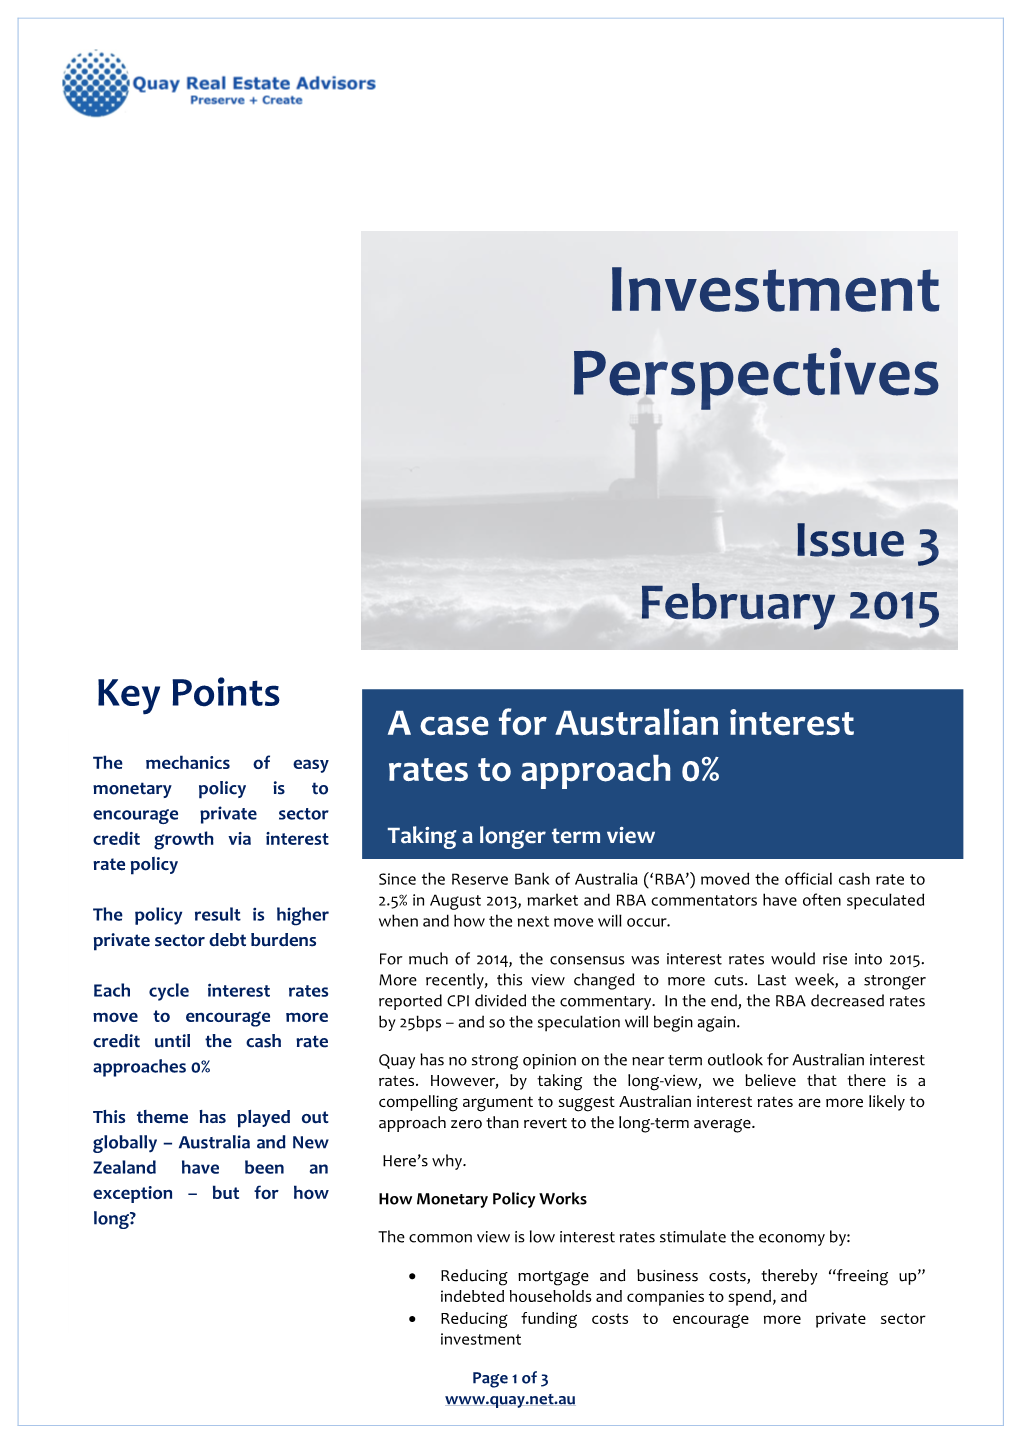 Investment Perspectives